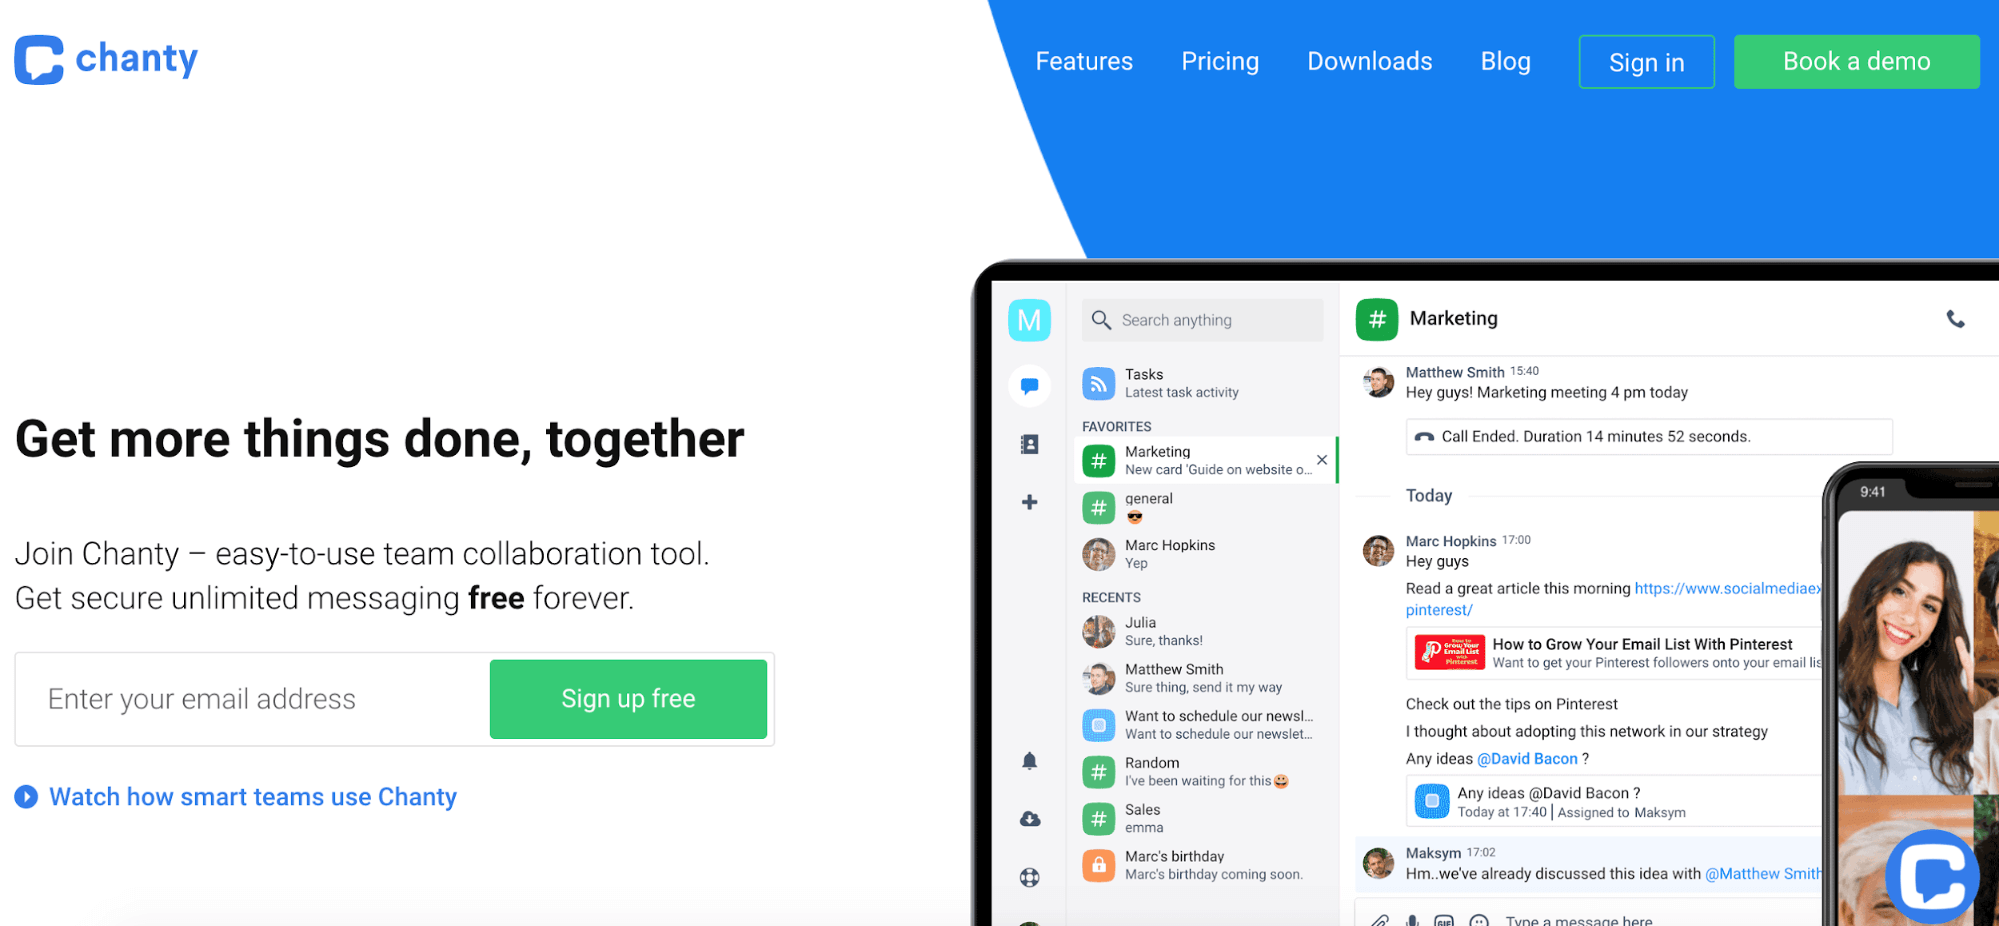 Chanty, a great remote working tool